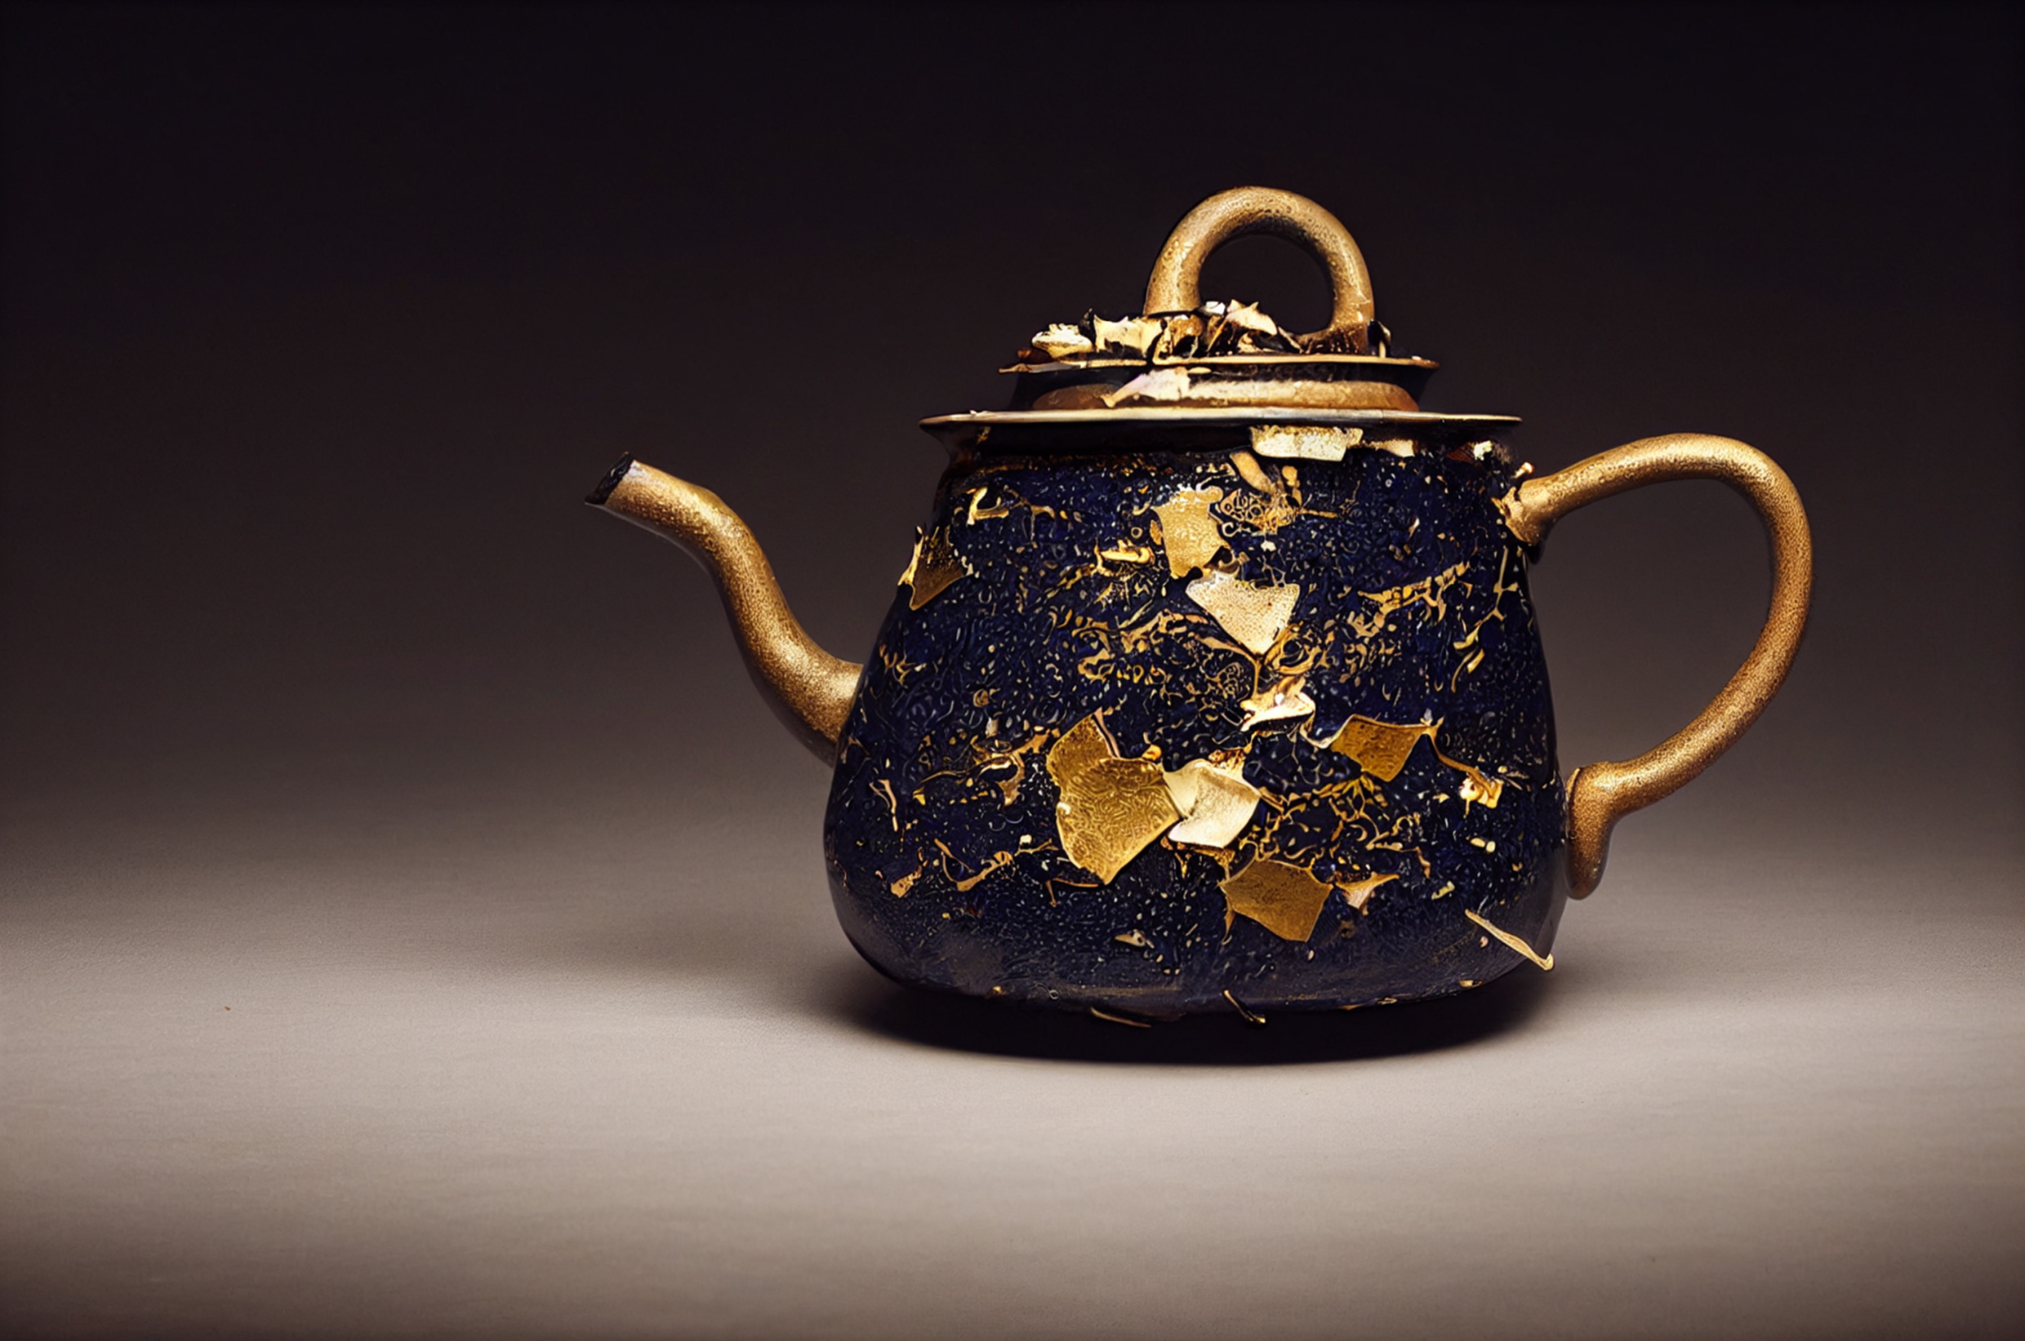 Kintsugi Pottery: The Art of Repairing With Gold - Invaluable